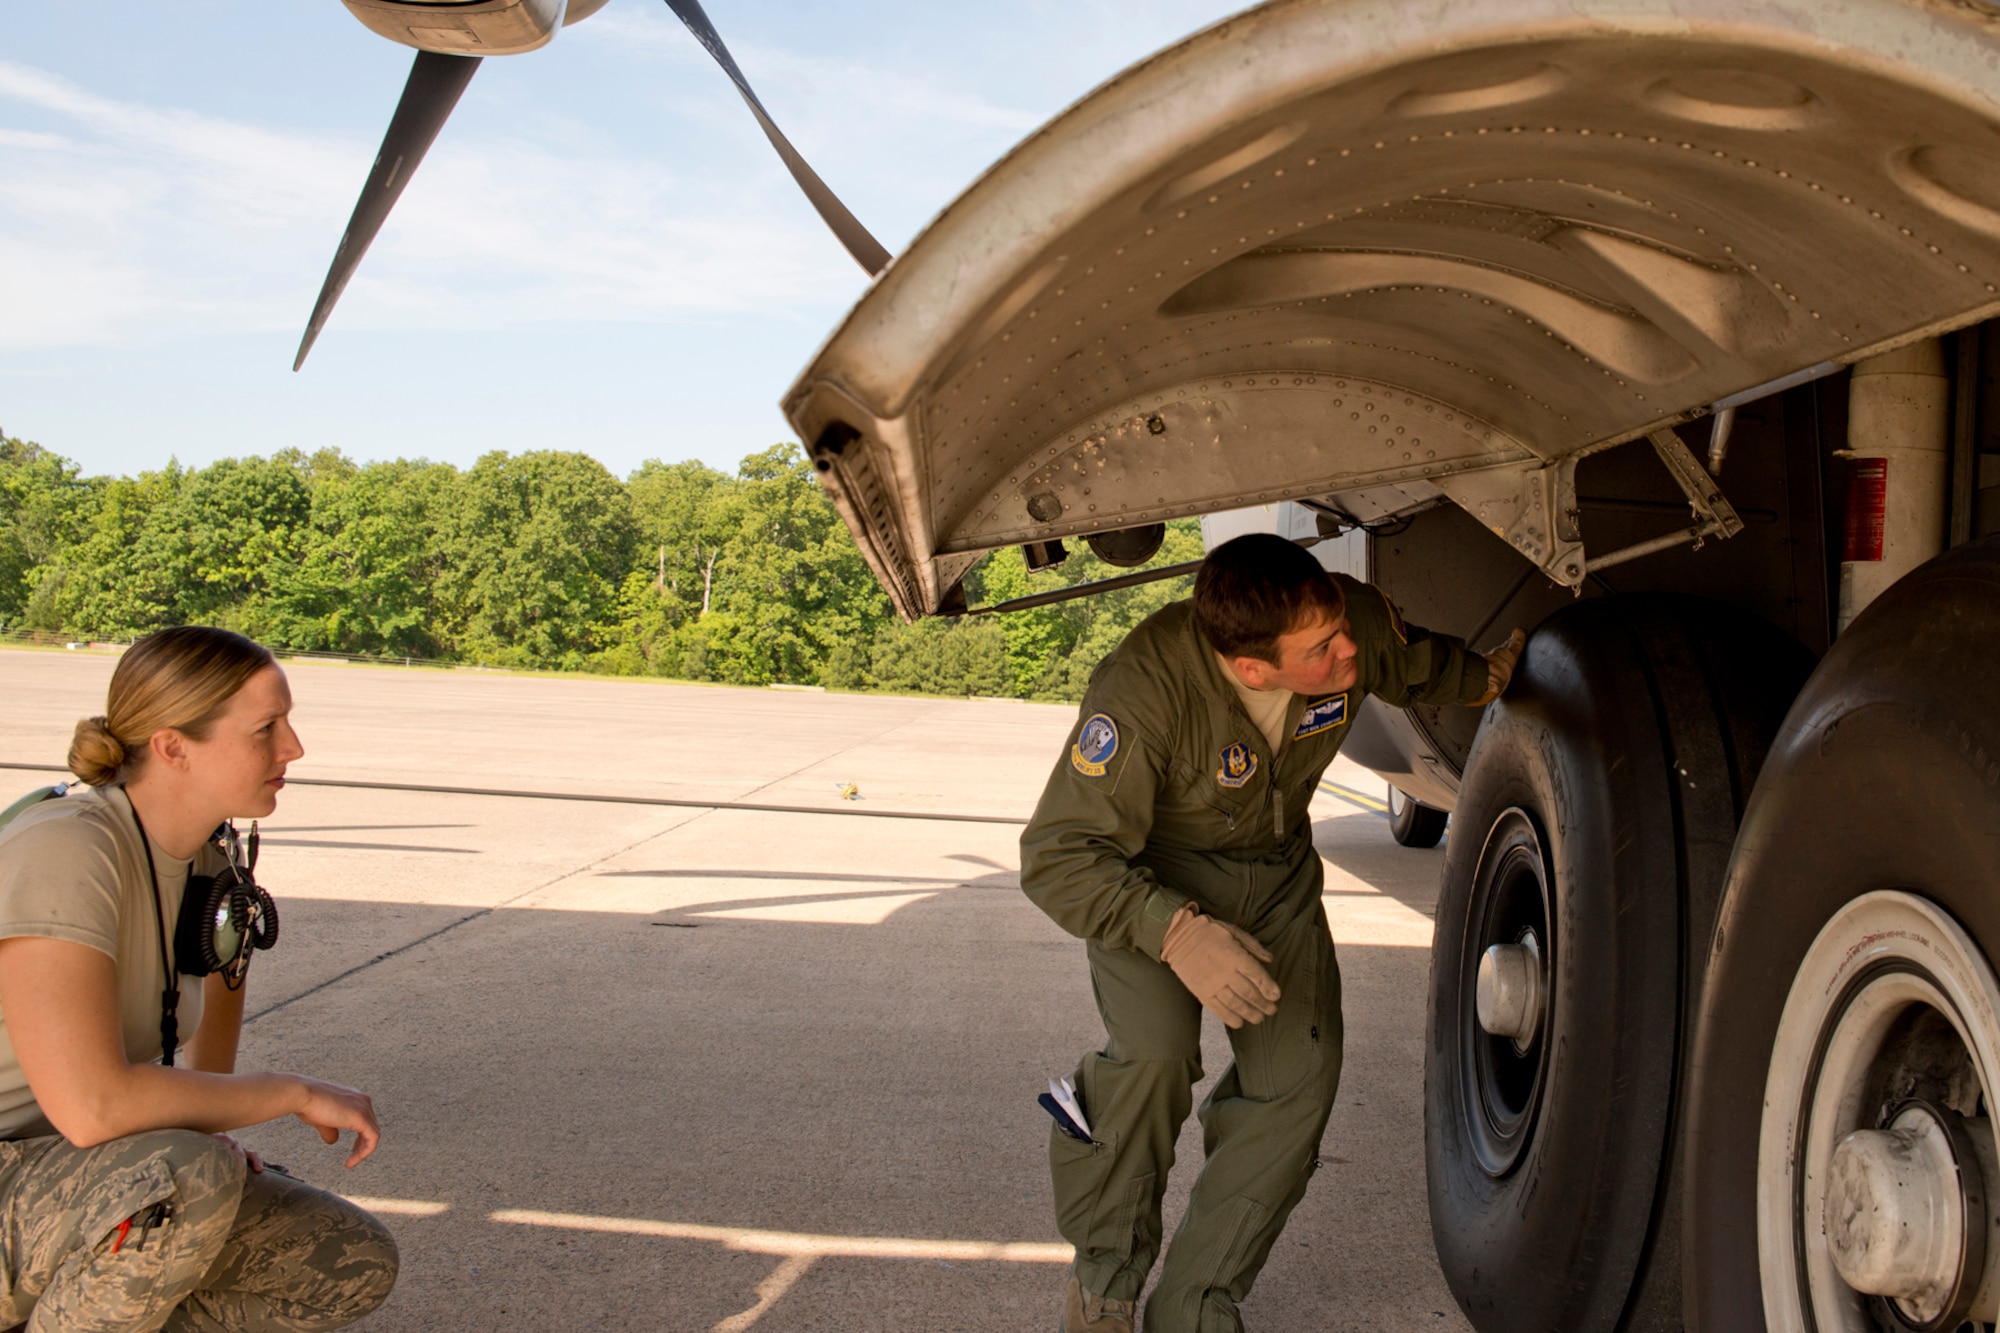 U.S. Air Force Reserve Tech. Sgt. Nick Crawford, loadmaster, 327th Airlift Squadron, and Senior Airmen Jennifer Franke, crew chief, 913th Maintenance Squadron, conduct a preflight inspection of a C-130J at Little Rock Air Force Base, Ark., May 13, 2016. Airmen from the 913th Airlift Group participated in a Turkey Shoot competition between six aircrews from five units at Little Rock AFB. (U.S. Air Force photo by Master Sgt. Jeff Walston/Released)